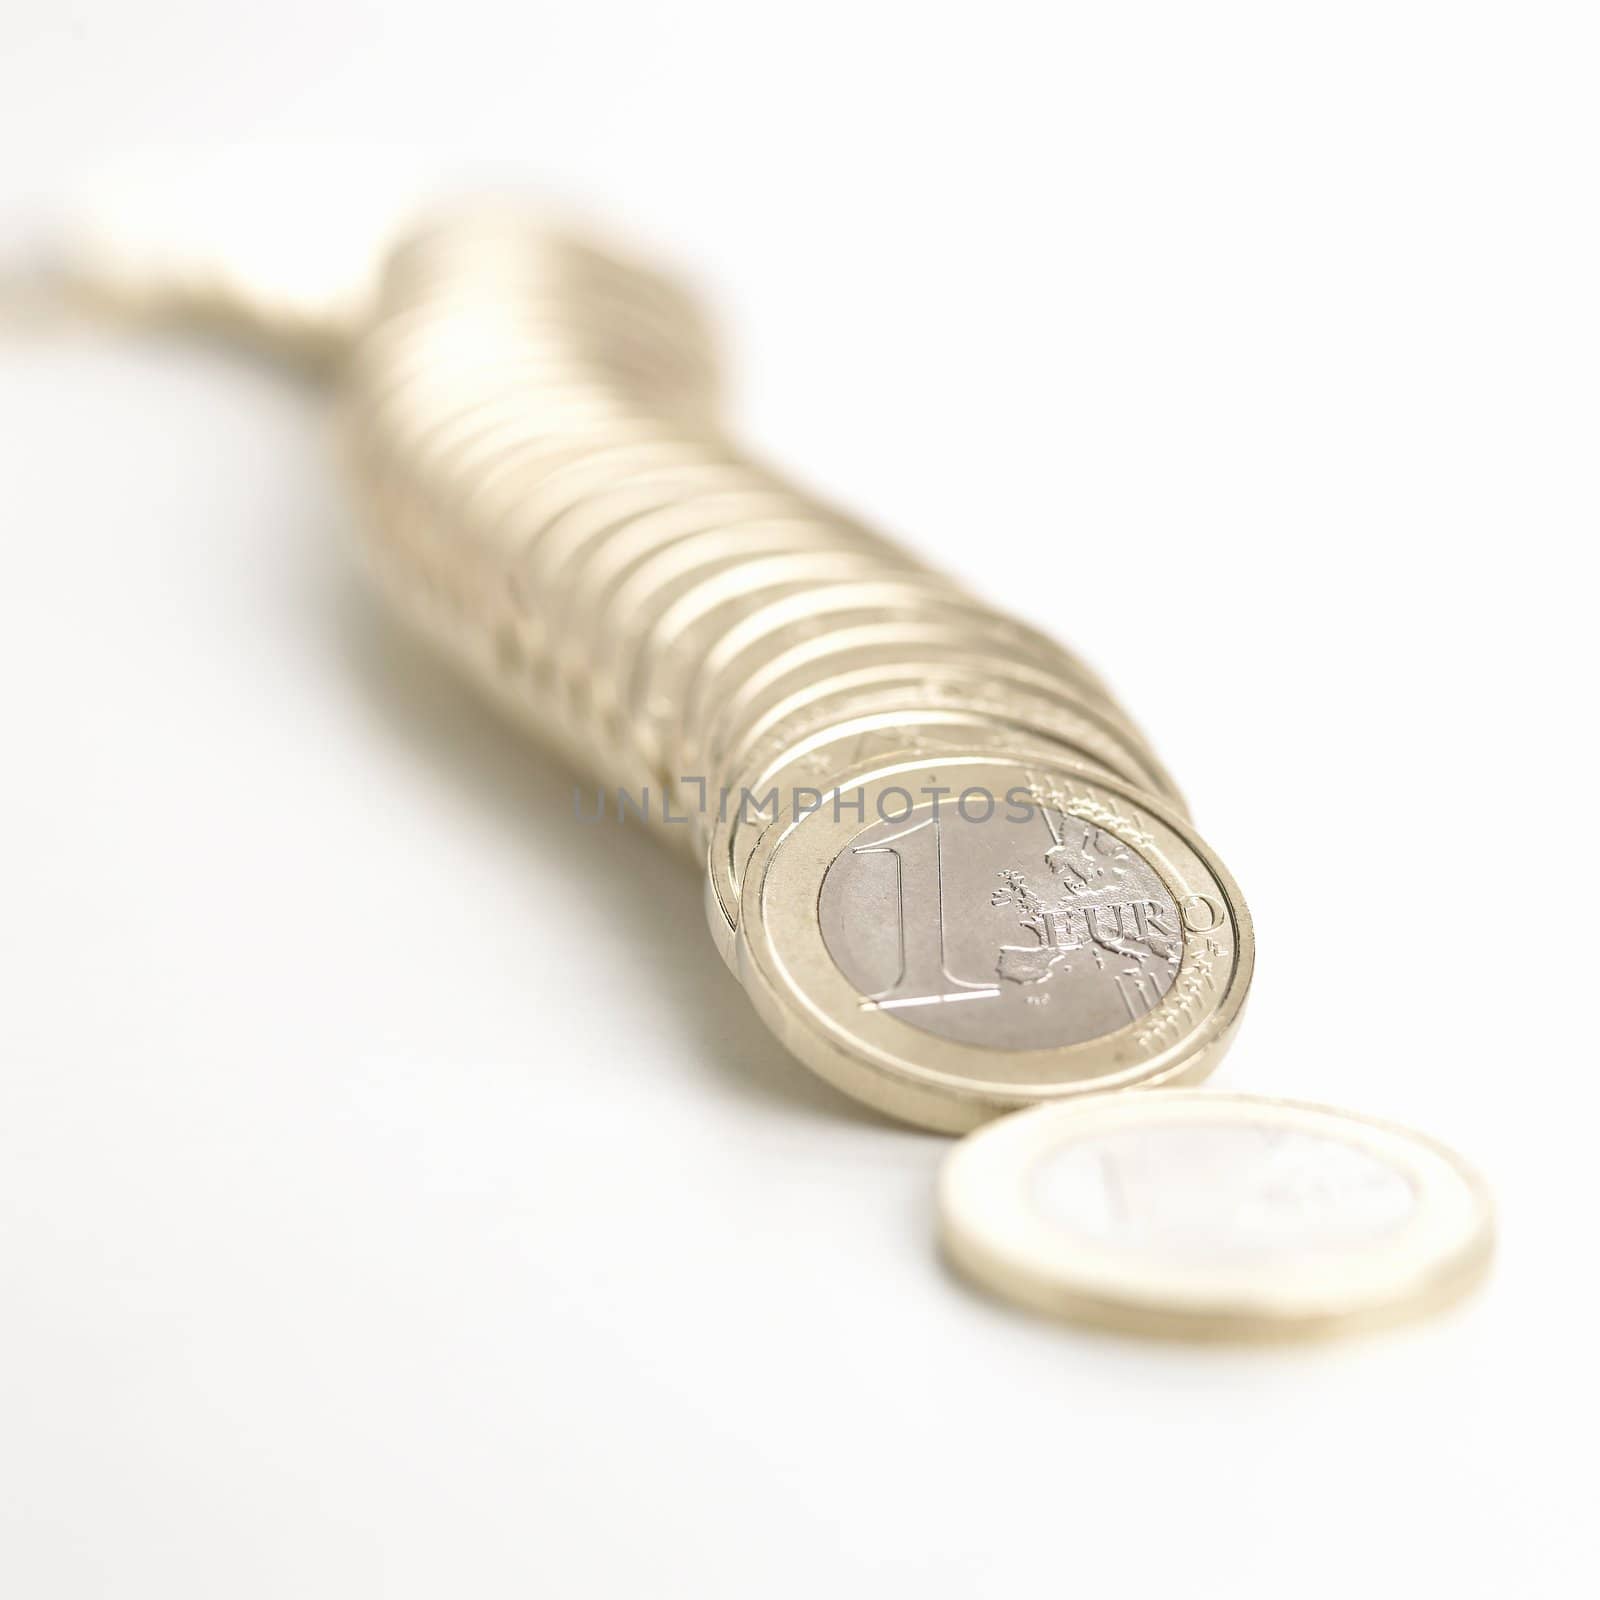 Euro coins on white in a domino effect